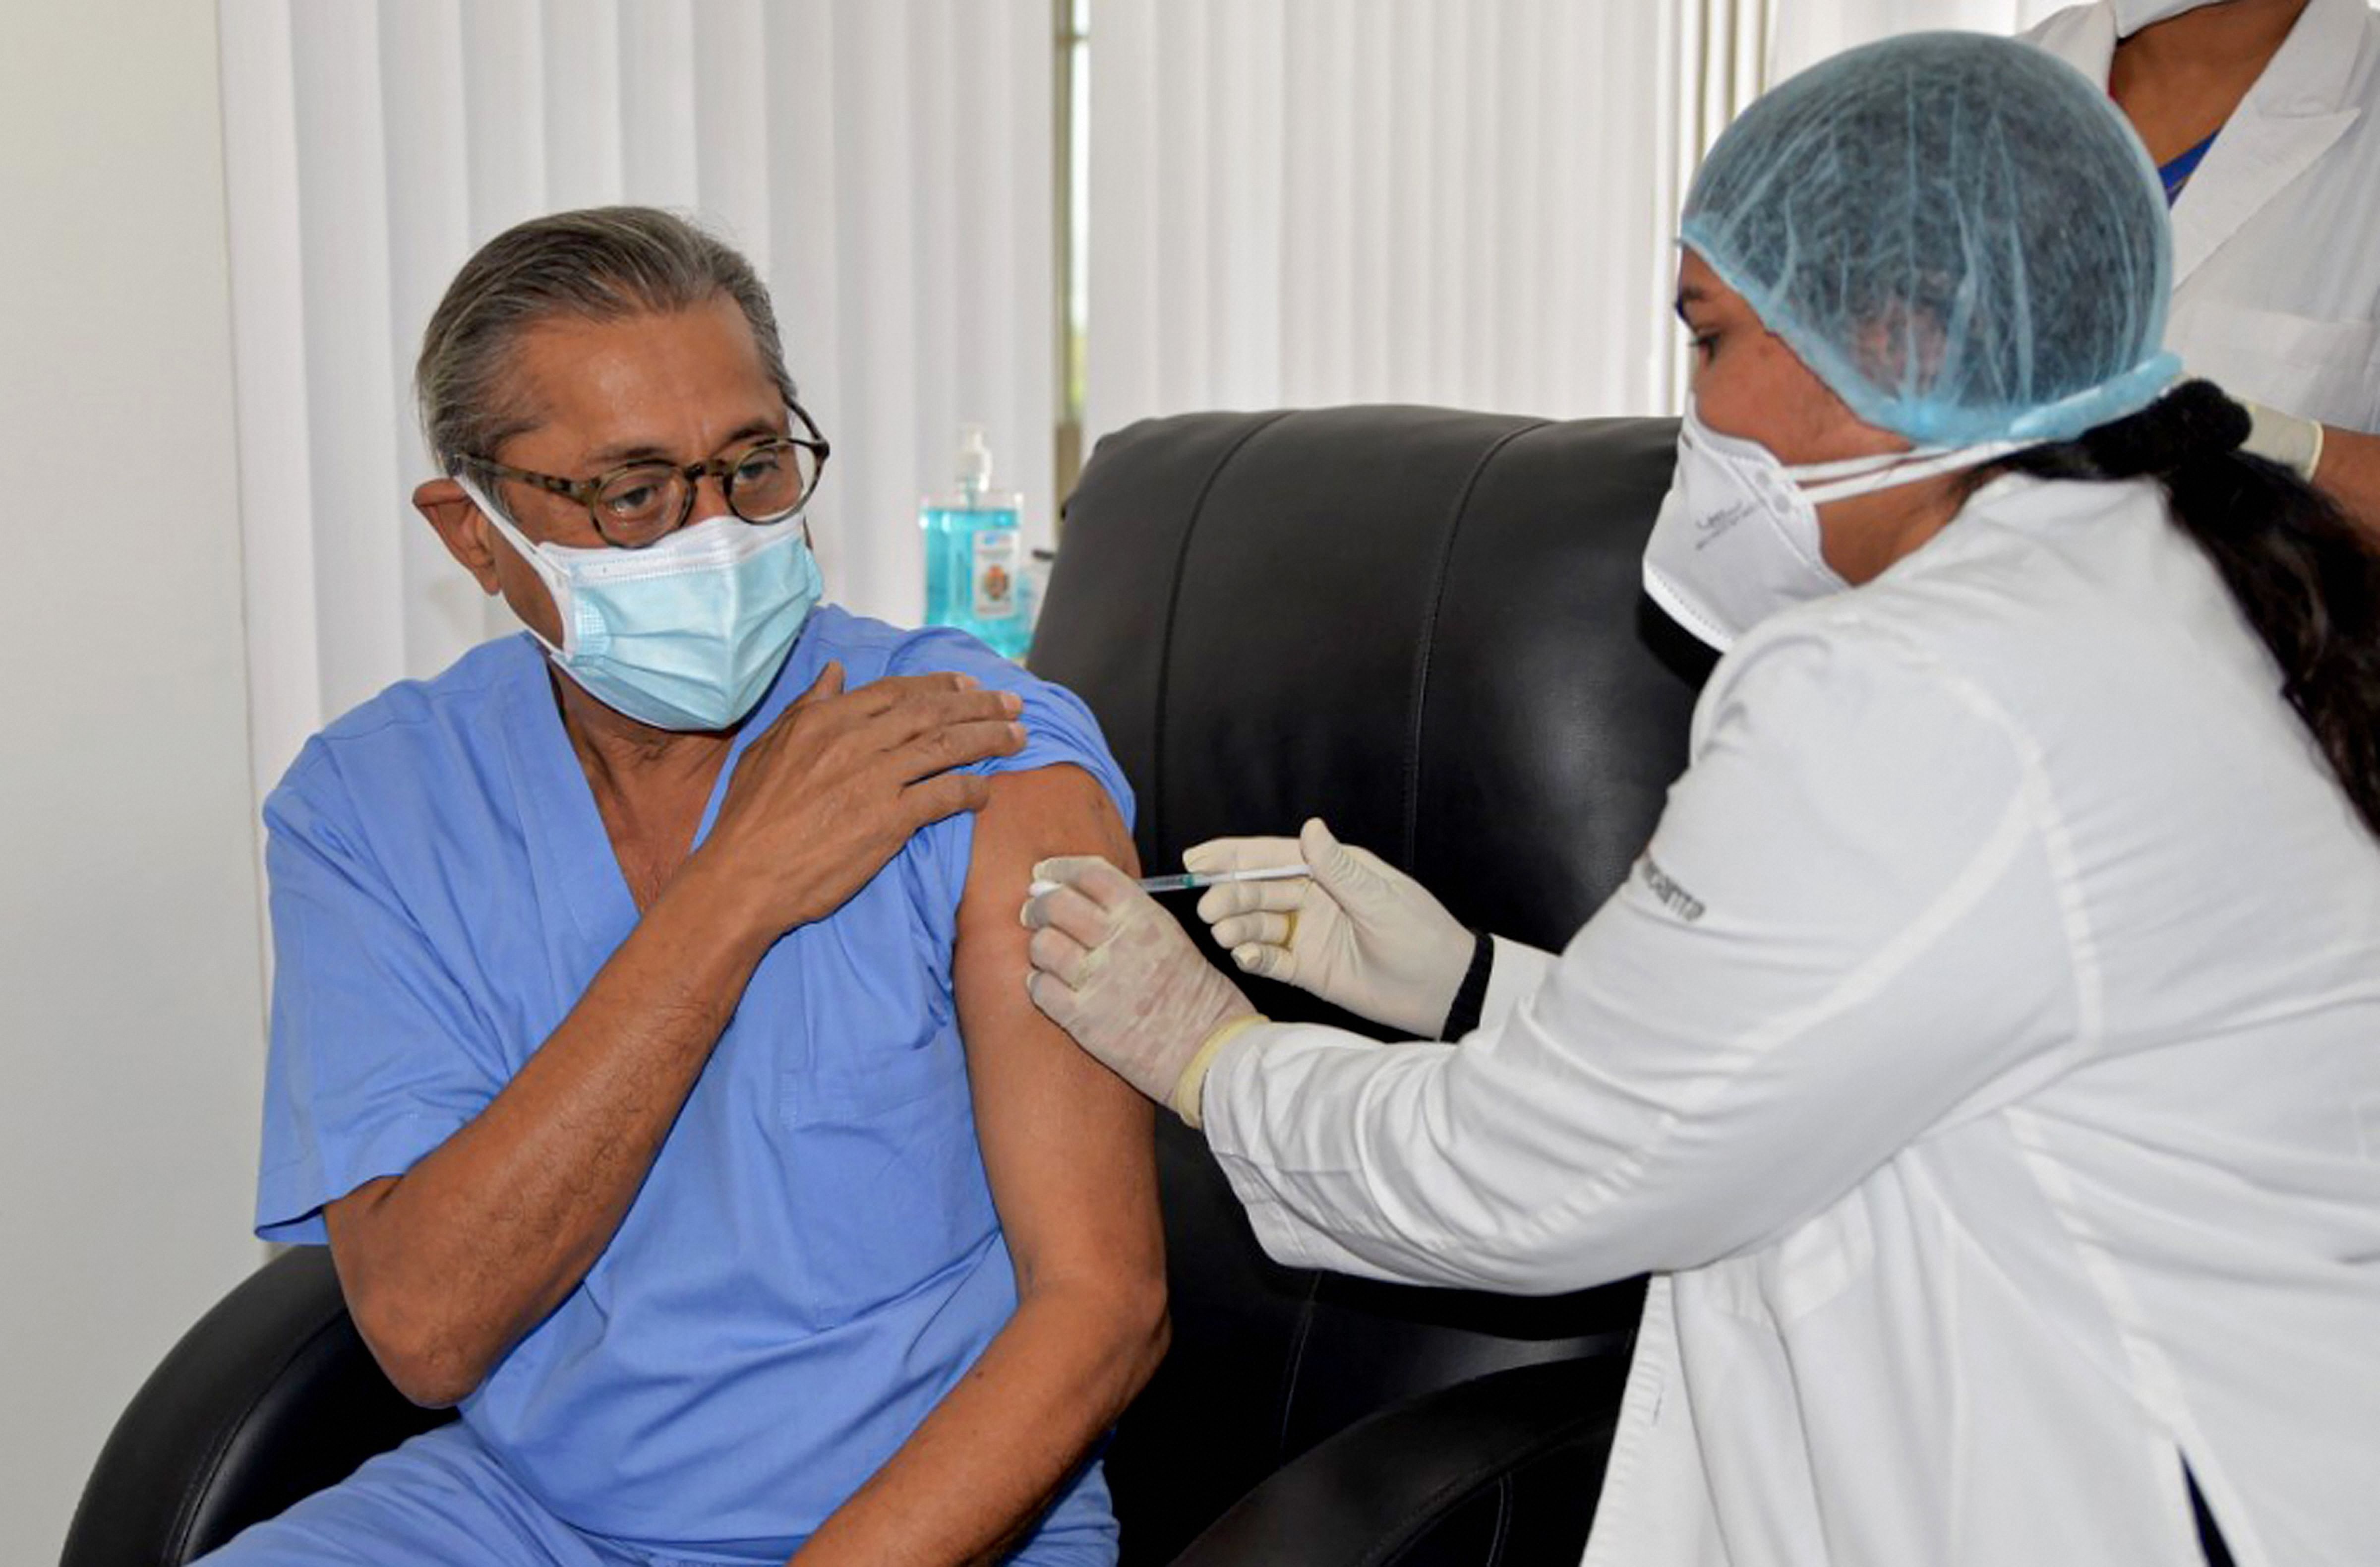 A medic administers the first dose of Covishield vaccine to Medanta Hospital Chairman & Managing Director Dr Naresh Trehan, after the virtual launch of COVID-19 vaccination drive by Prime Minister Narendra Modi, at Medanta Hospital in Gurugram, Saturday, Jan. 16, 2021. Credit: PTI Photo